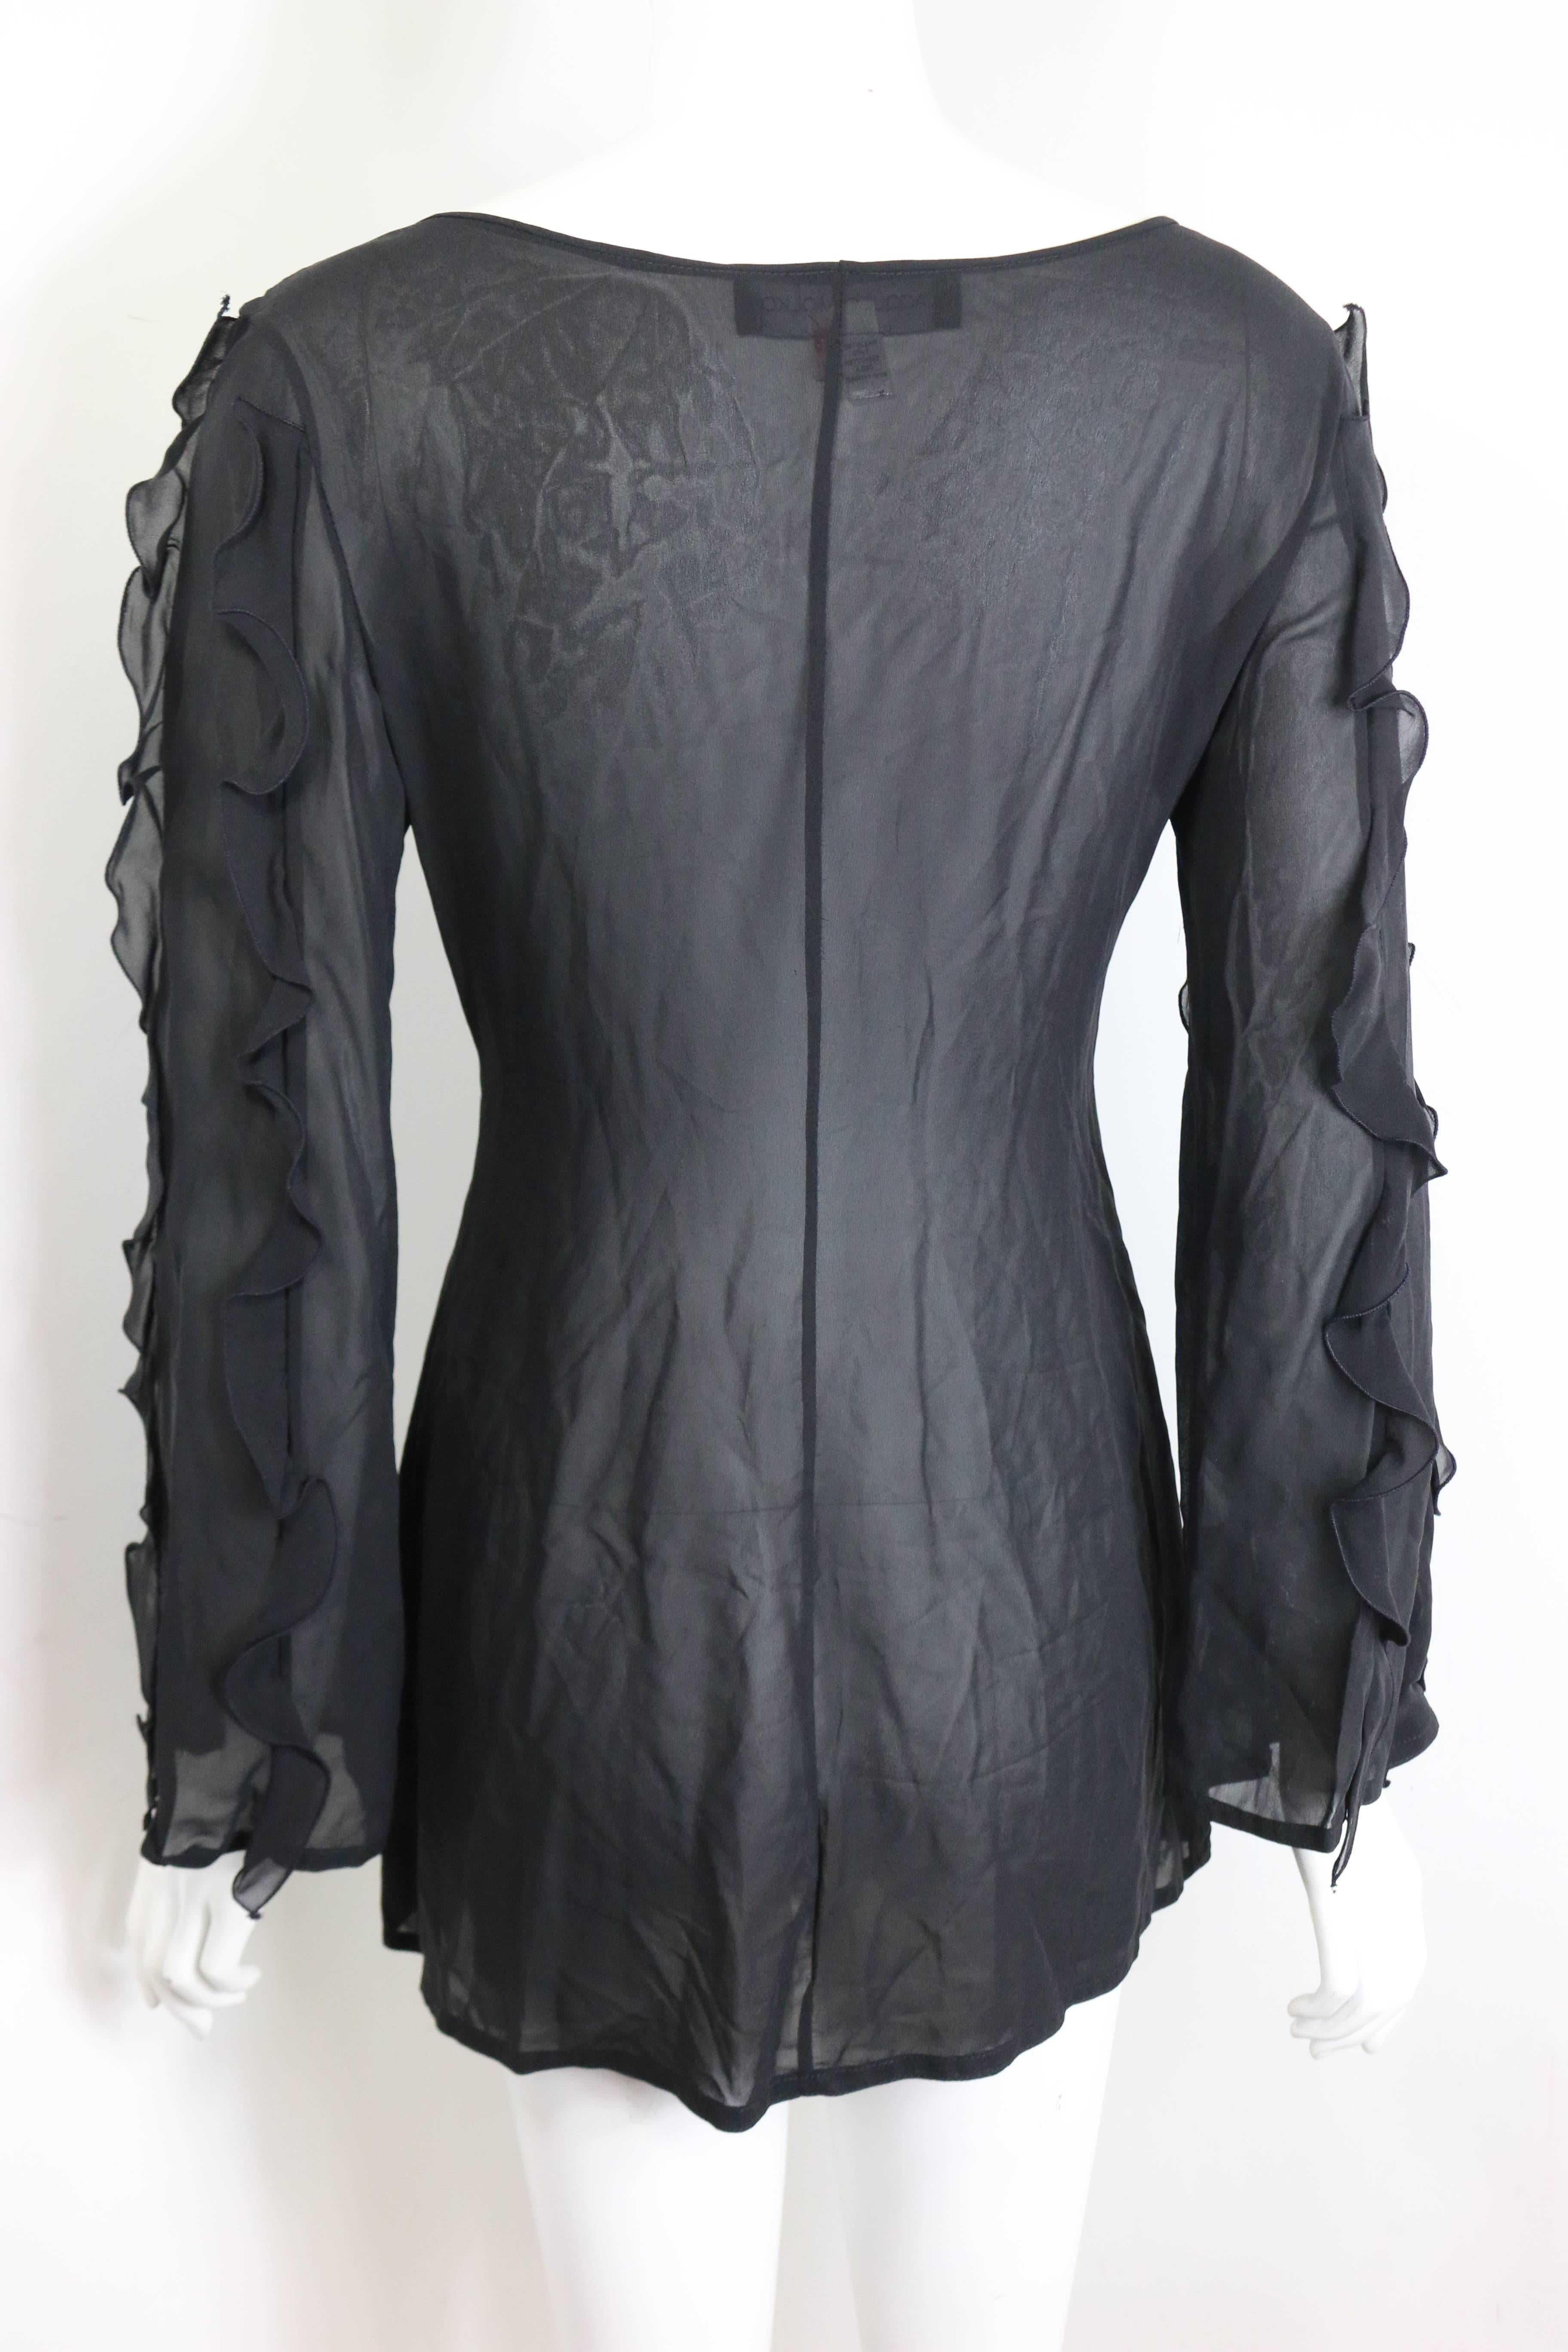 Jacques Molko Black Silk See Through Ruffle Shirt In Excellent Condition For Sale In Sheung Wan, HK